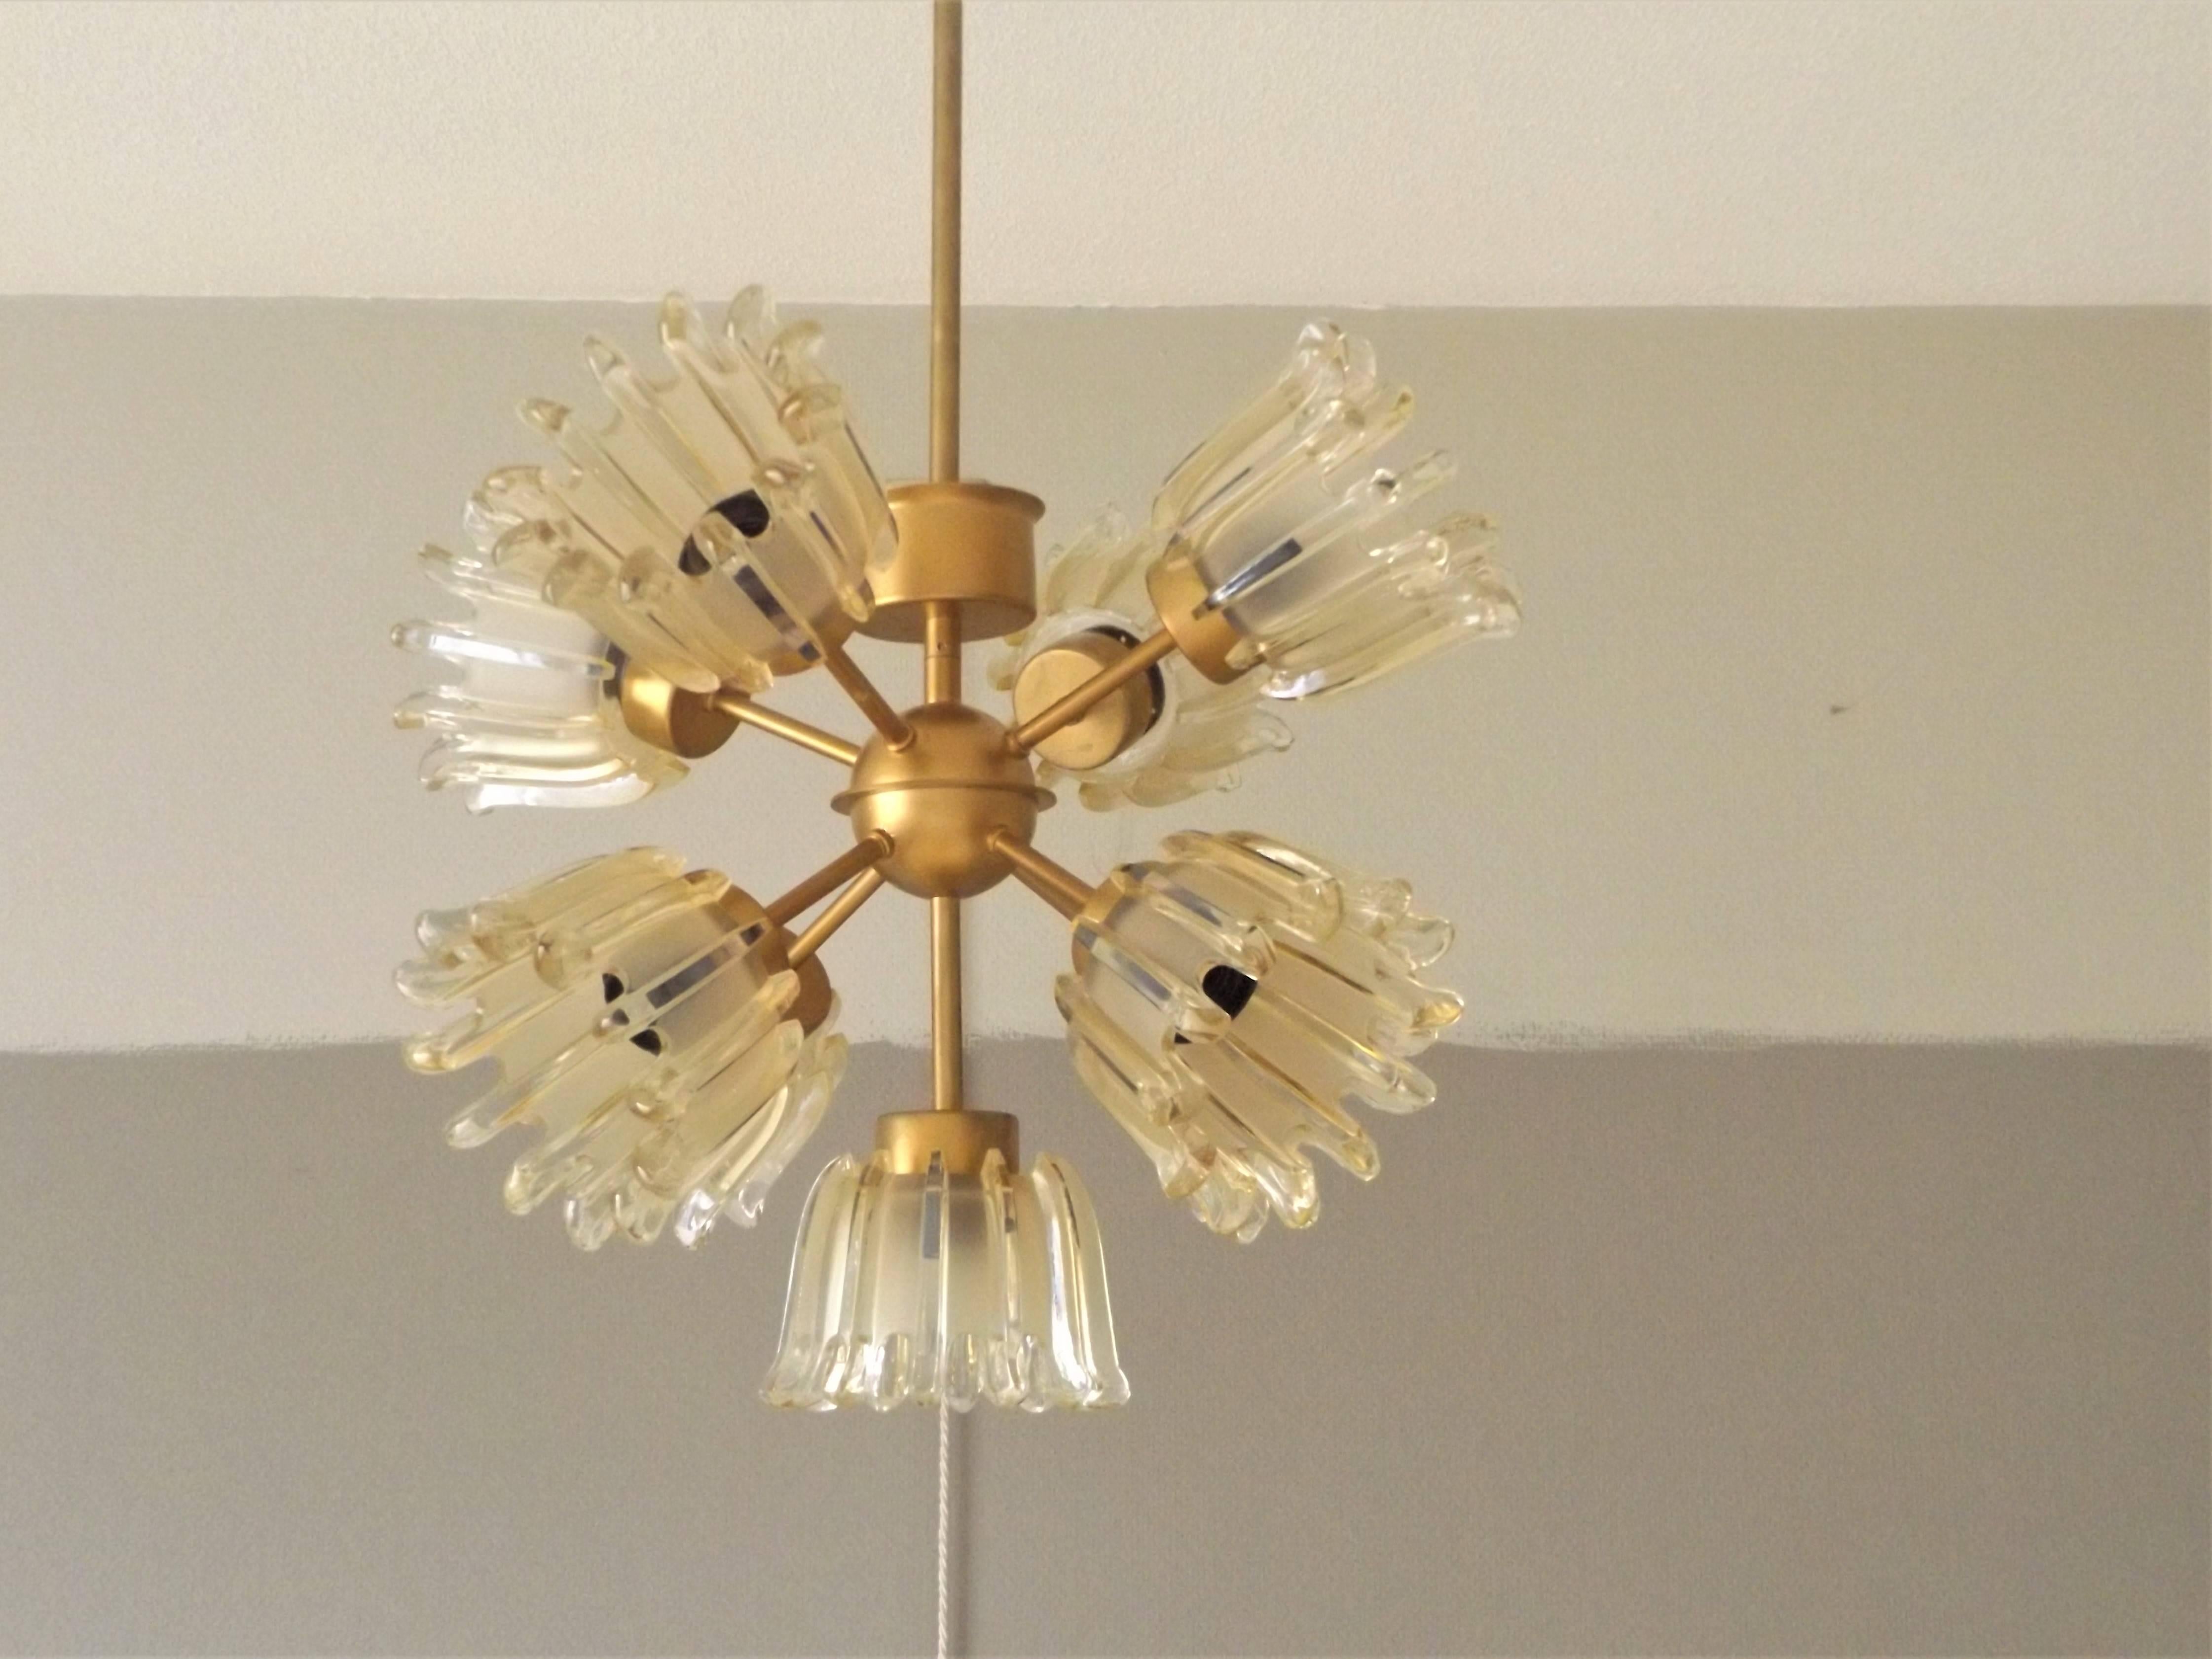 Wonderful tulip glass chandelier design by Doria Leuchten.

The Sputnik design was popular during the 1960s.

Subtile size, suitable for smaller rooms

The chandelier has nine-light points.

Good condition, made from brass and frosted